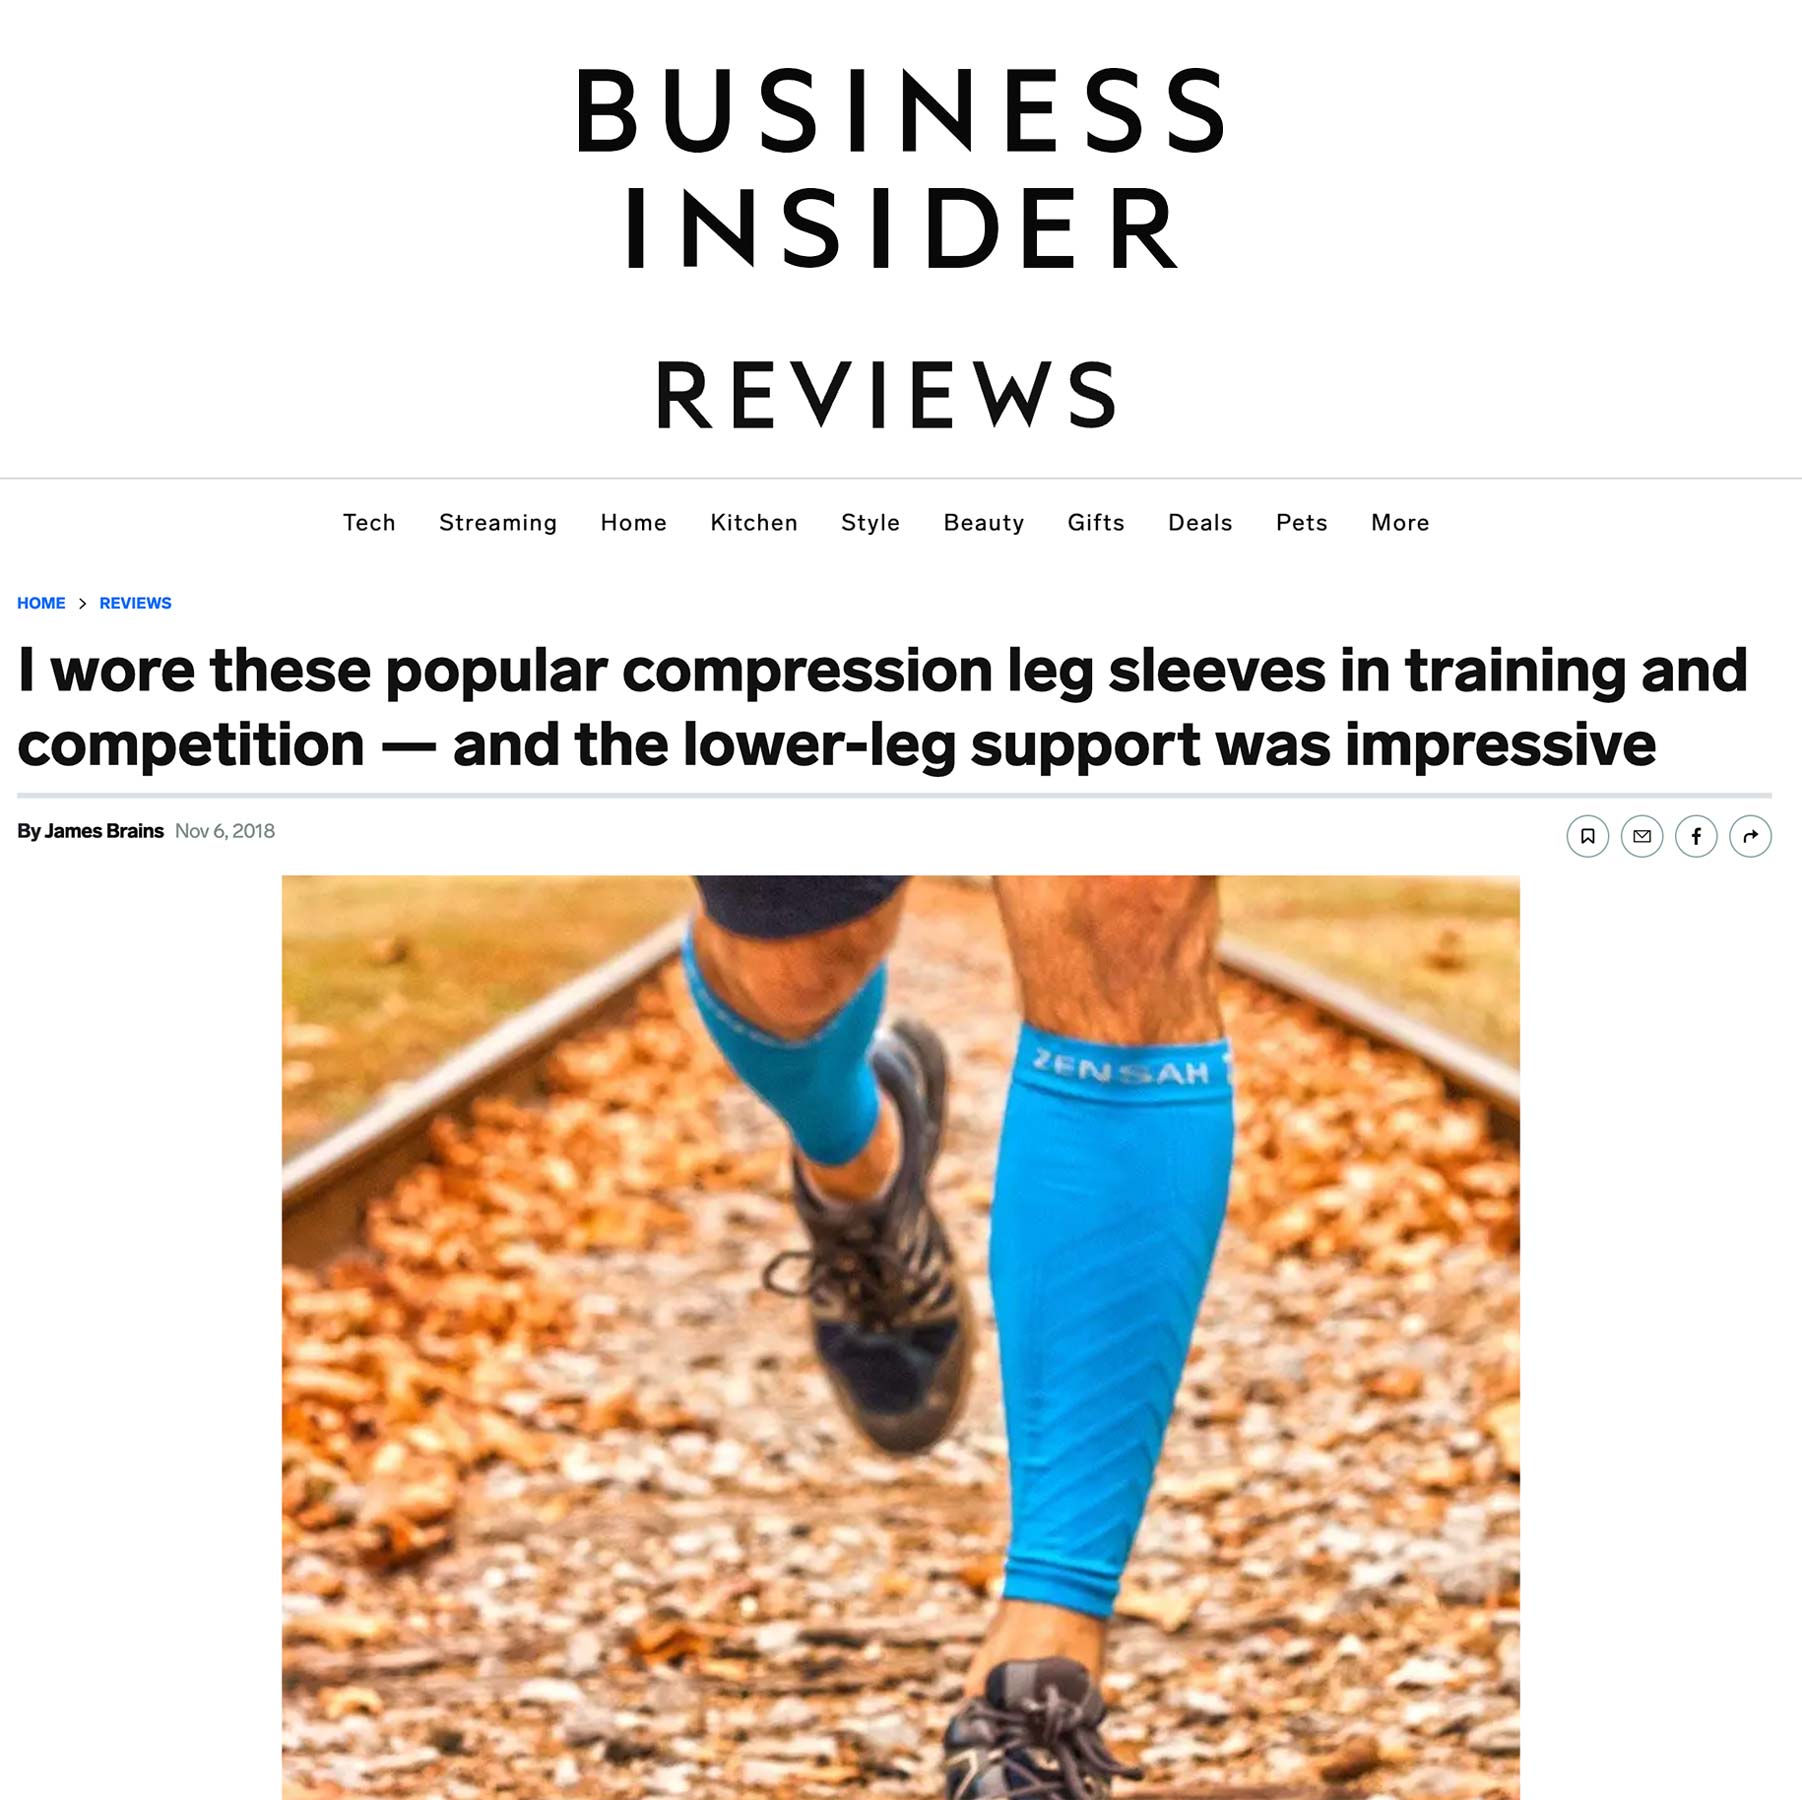 Business Insider: I wore these popular compression leg sleeves in training and competition — and the lower-leg support was impressive